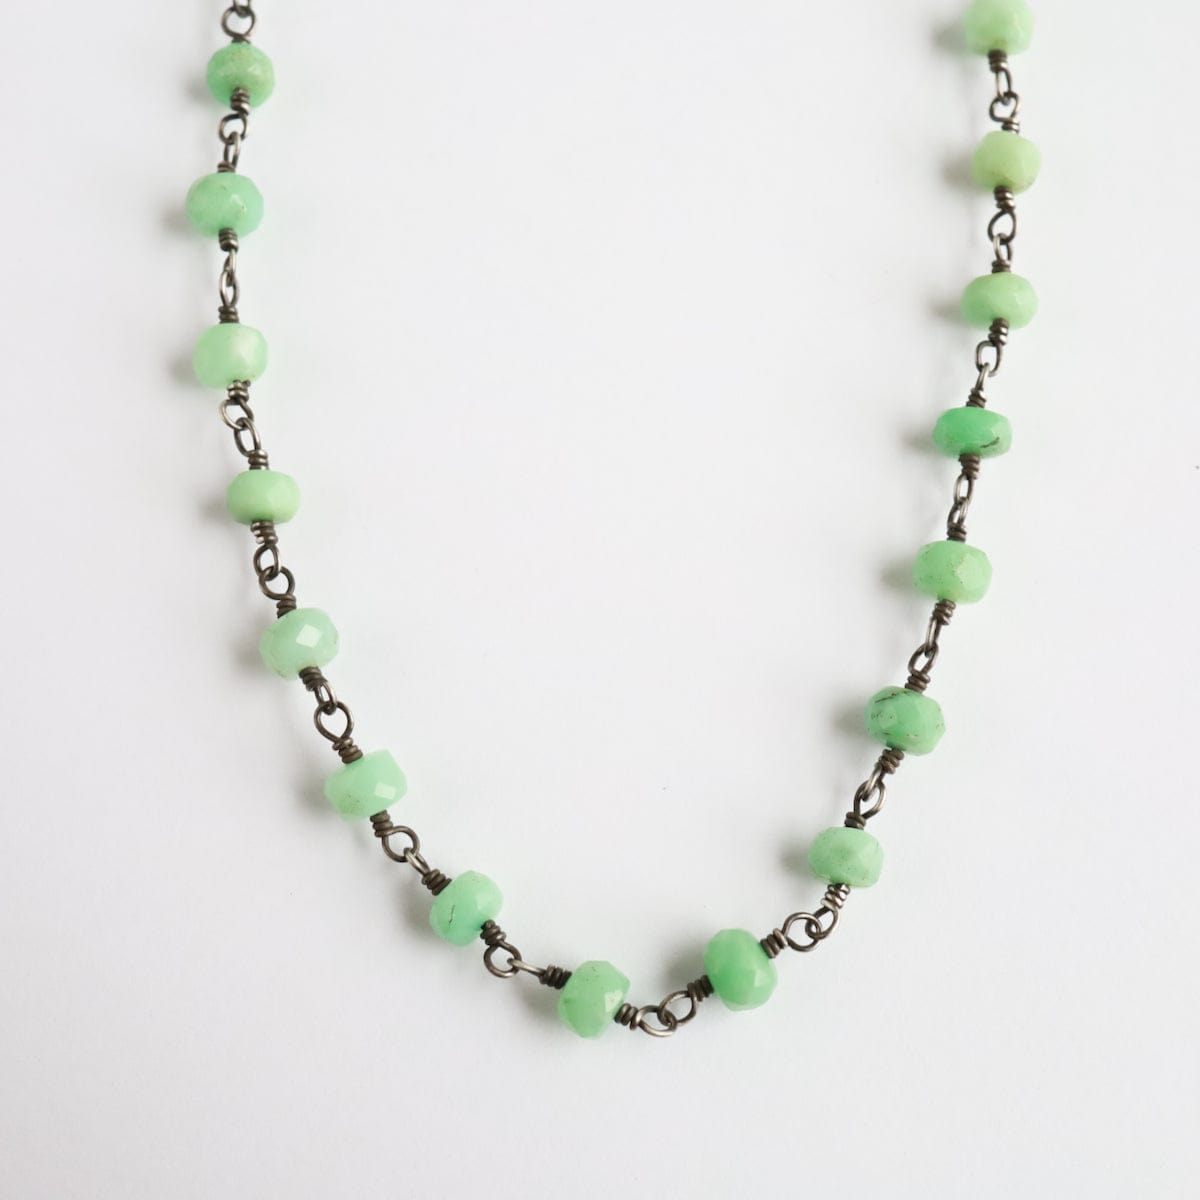 NKL Chrysoprase Oxidized Rosary Chain Necklace